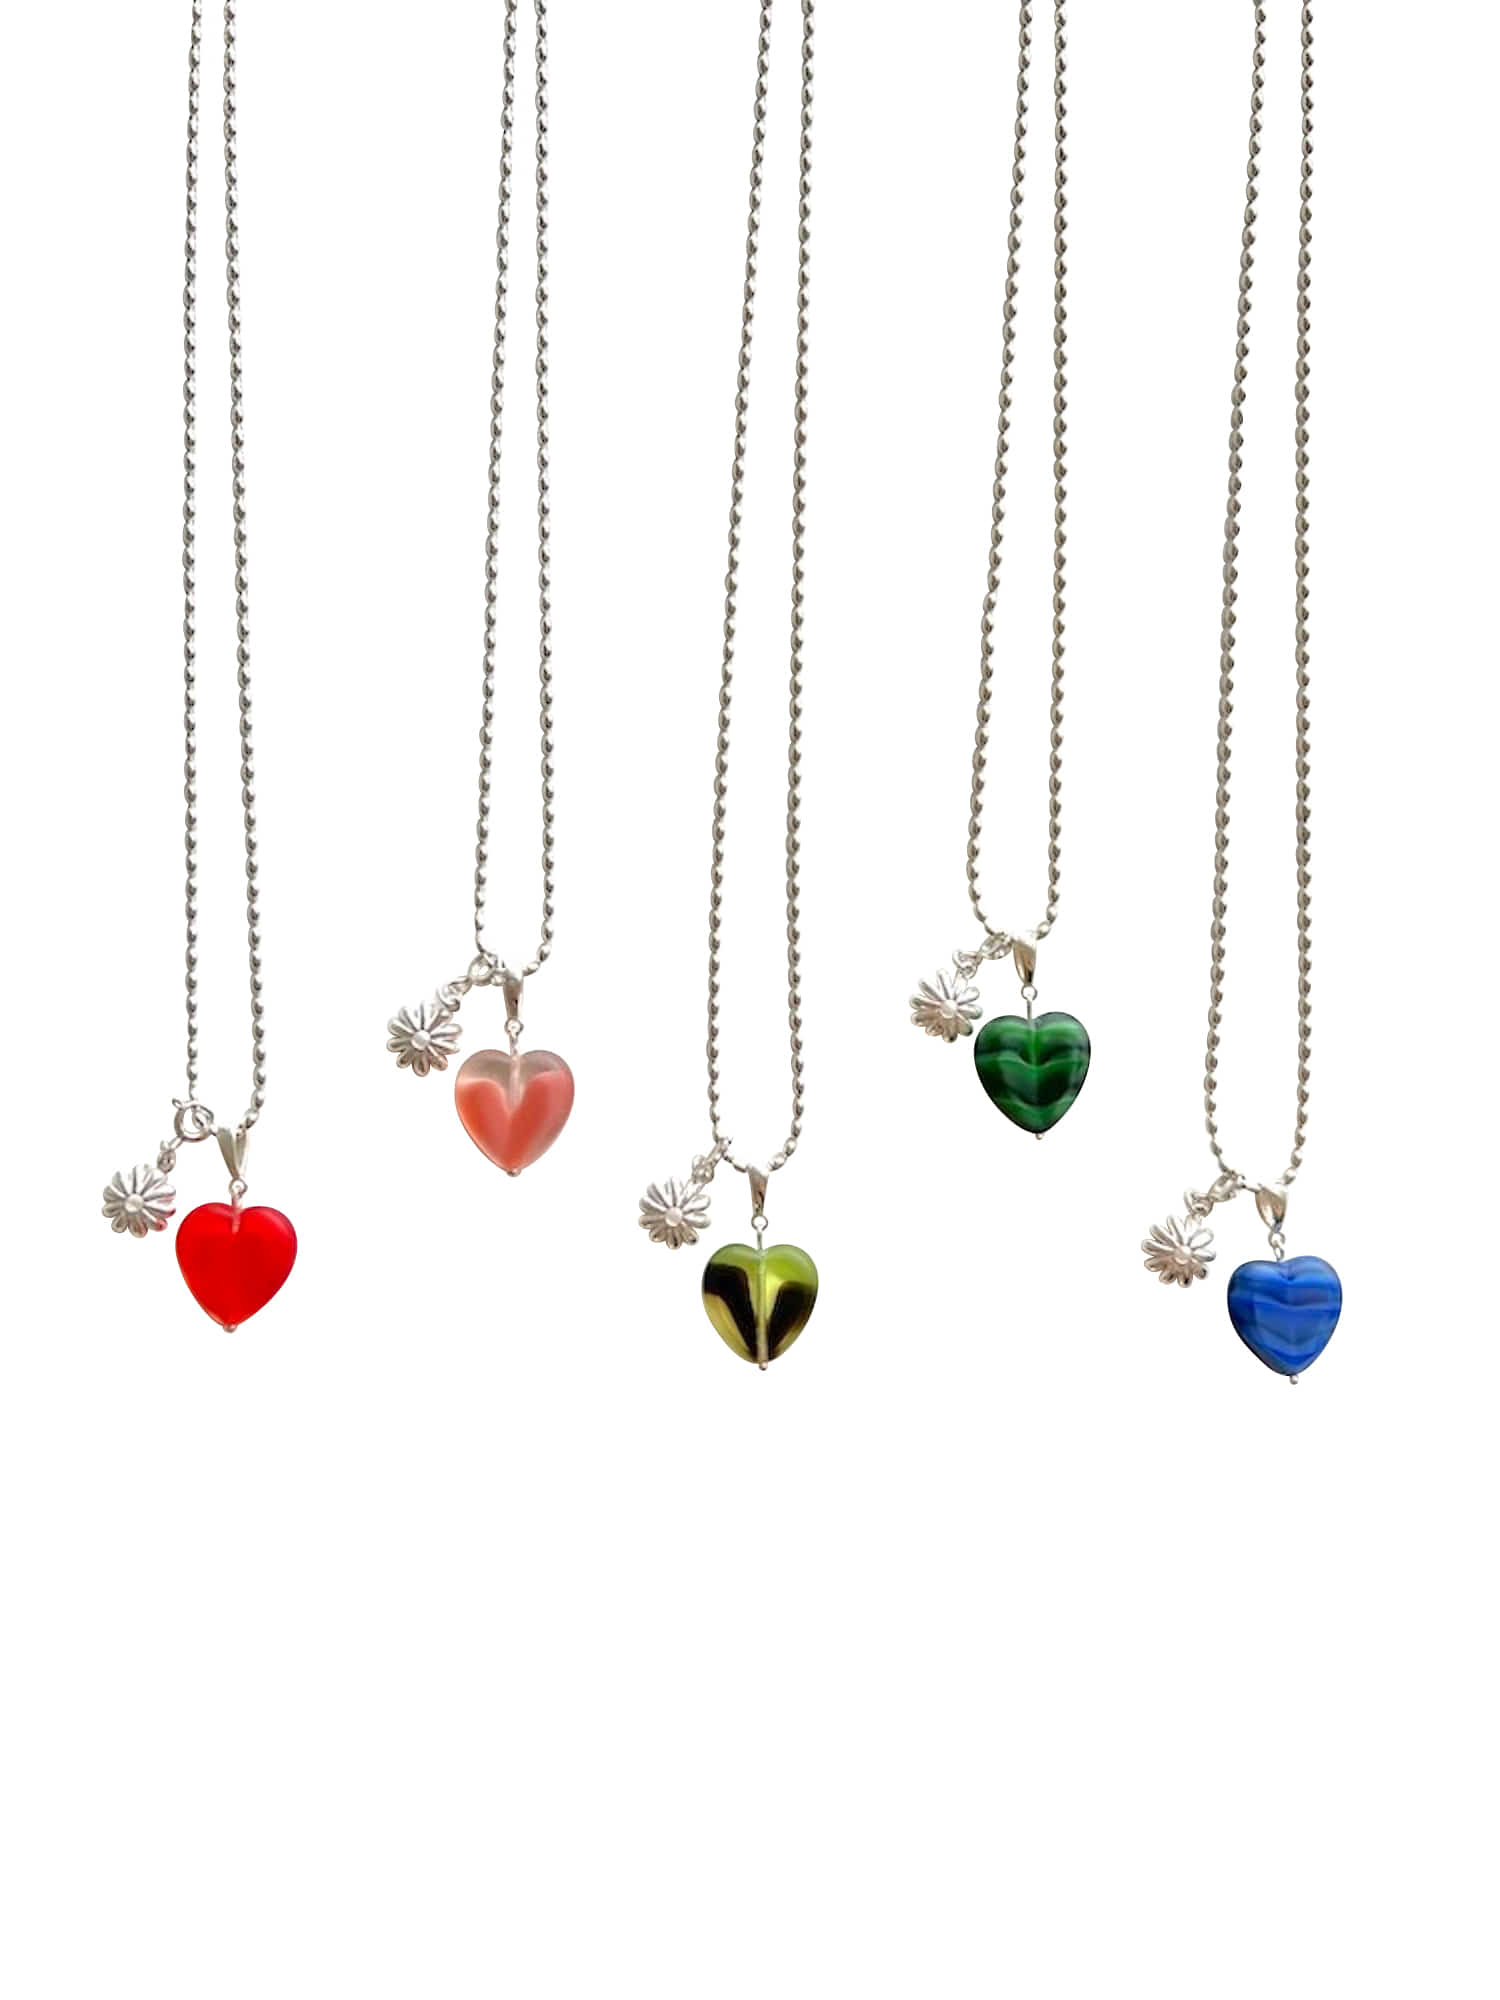 Glass Heart Necklace - 5 Colors